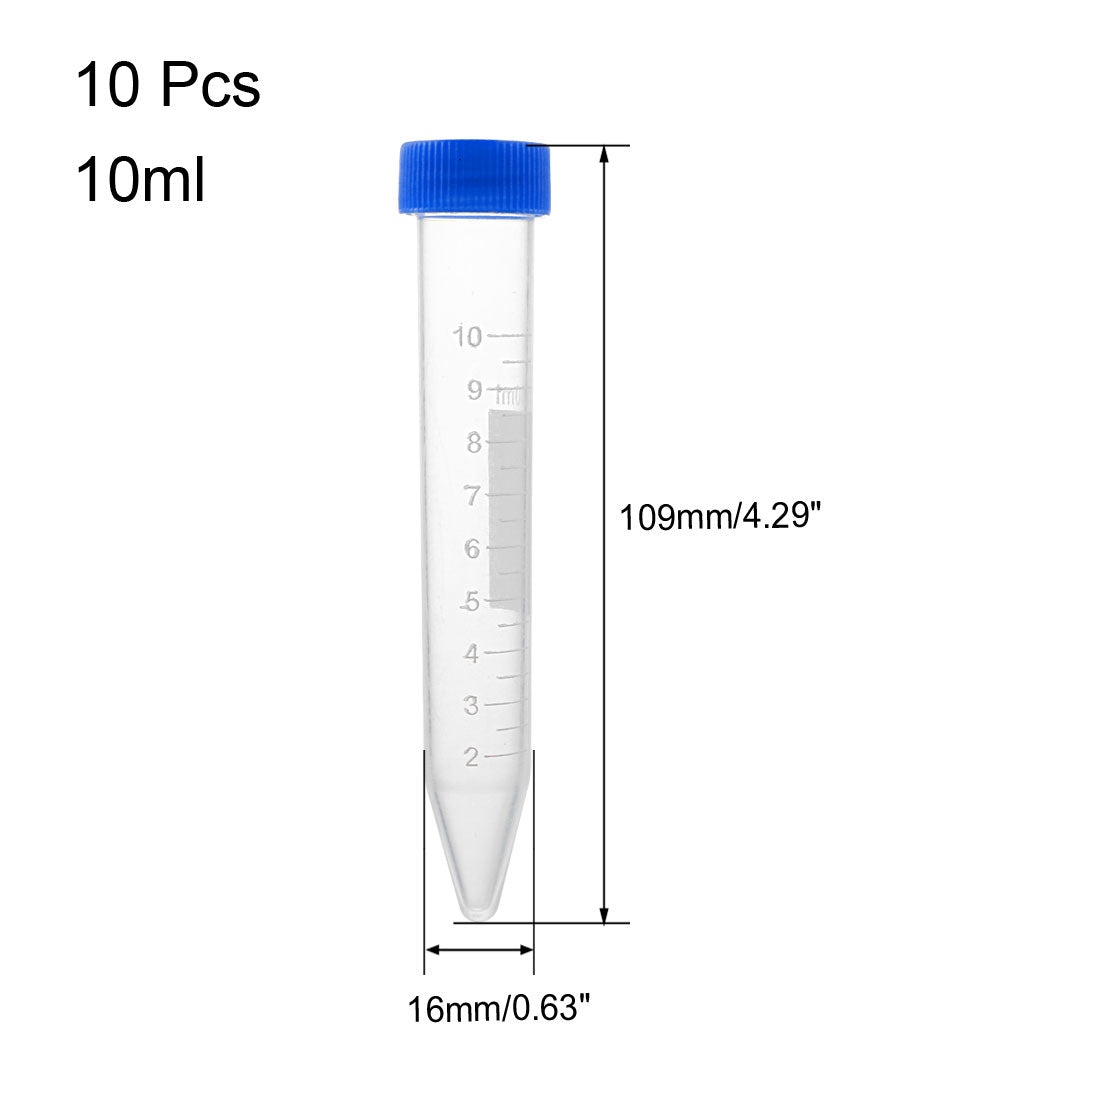 uxcell Uxcell 10 Pcs 10ml Plastic Centrifuge Tubes with Blue Screw Cap, Conical Bottom, Graduated Marks